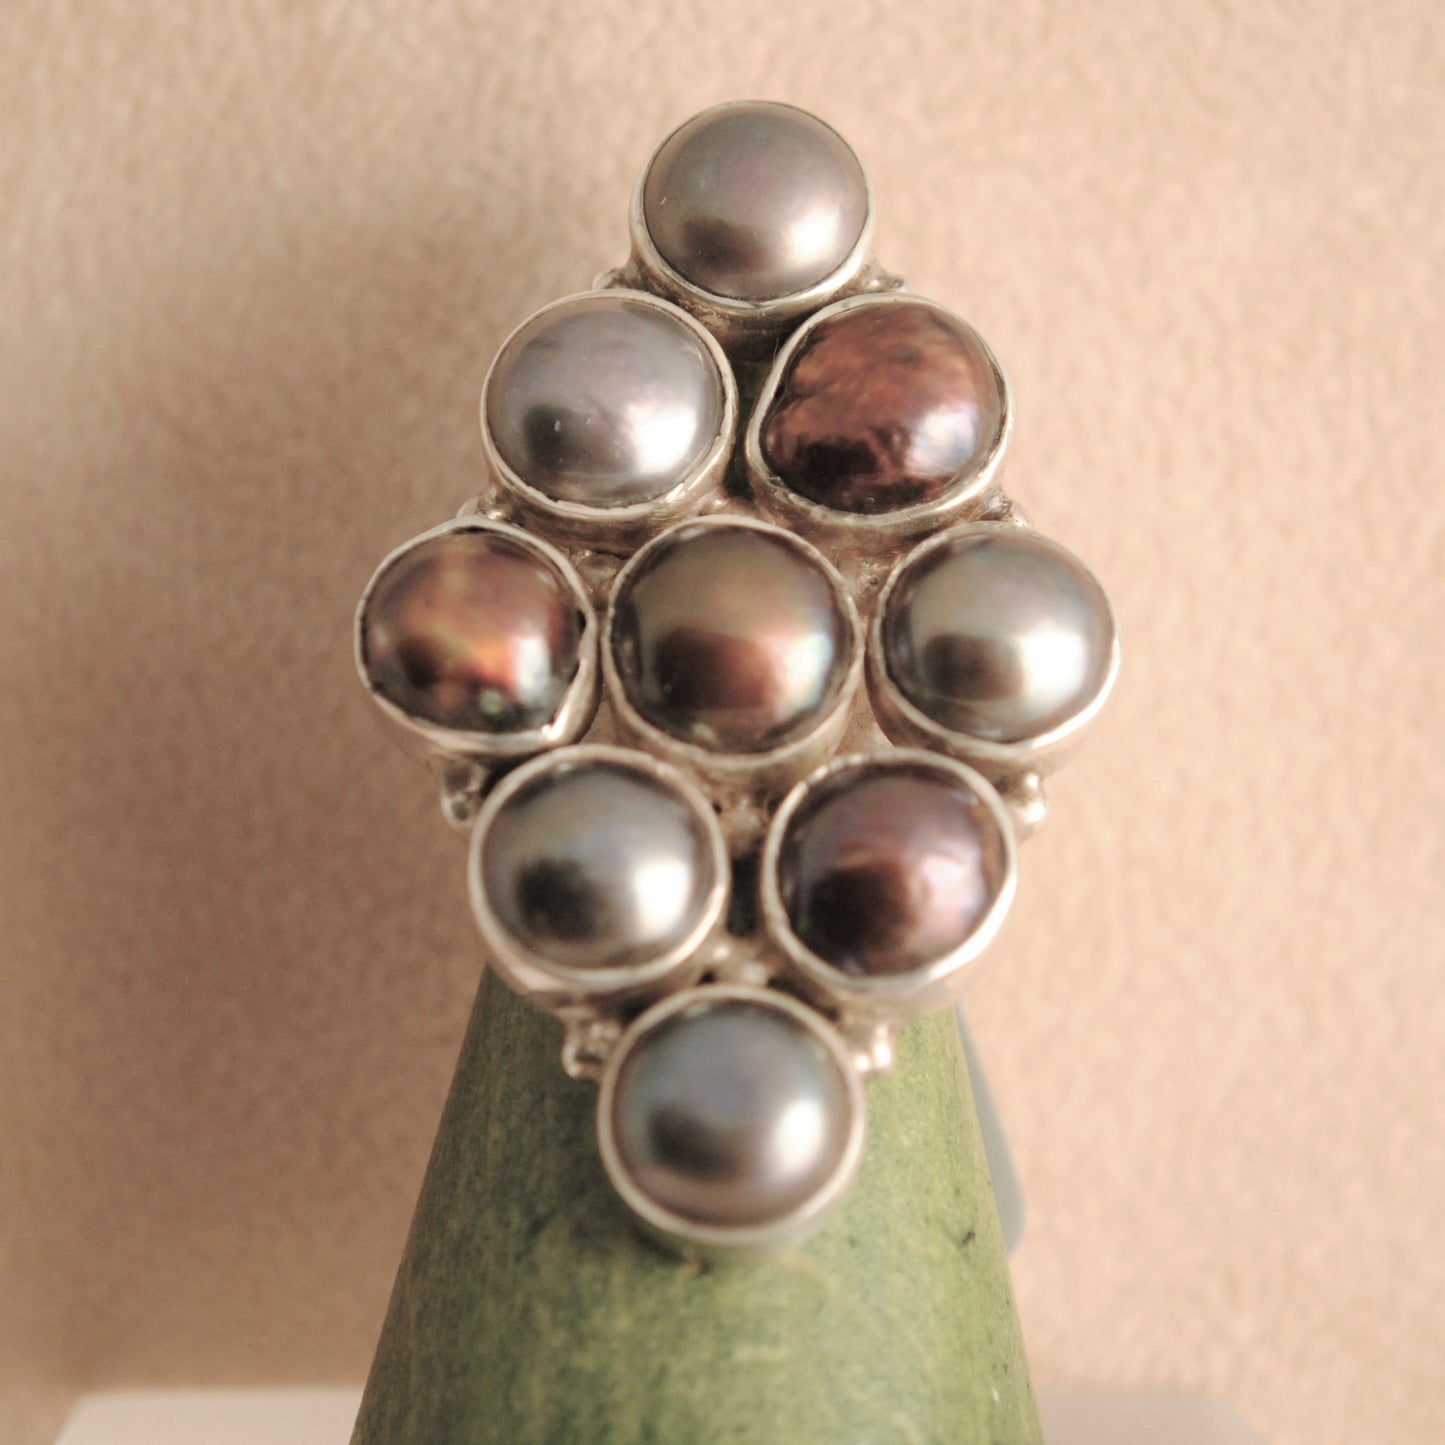 Handmade silver ring with 9 pearls